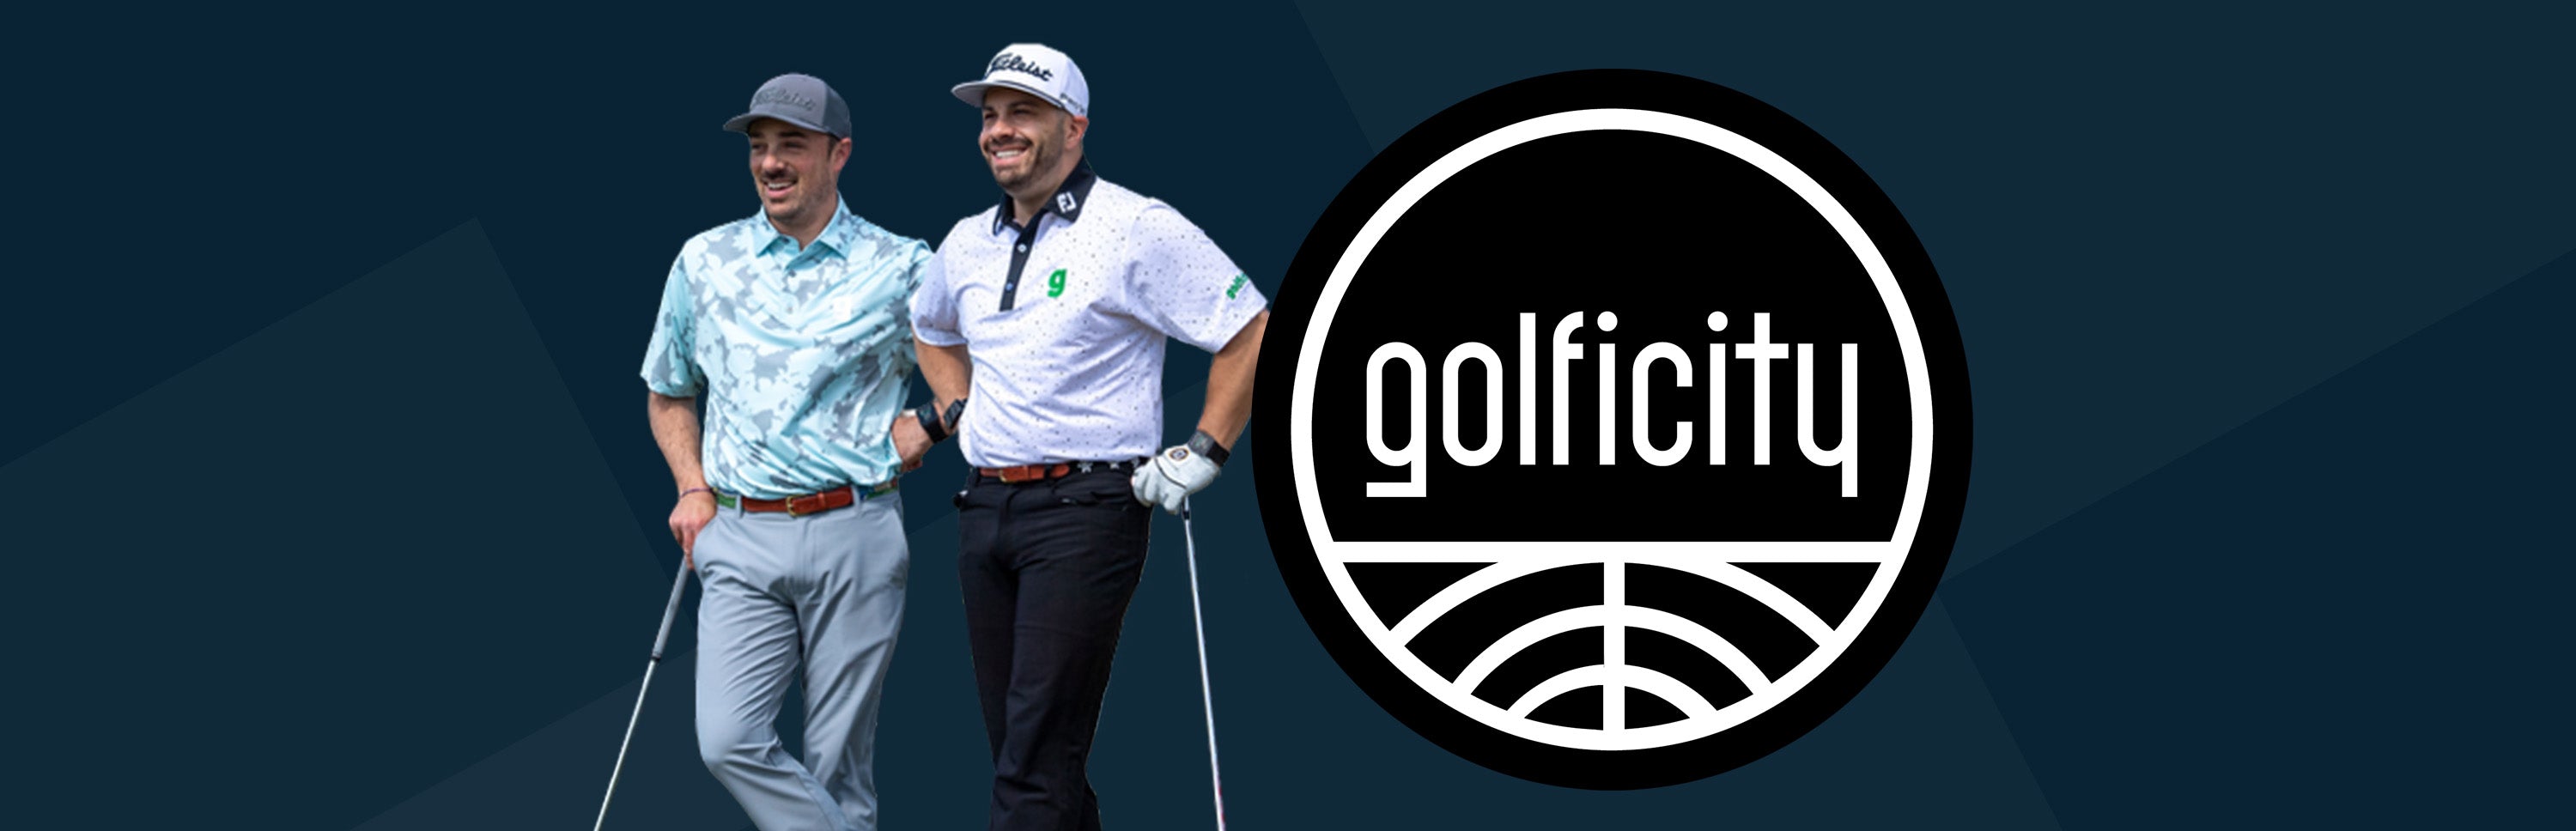 Let Golficity Help You Find the Best Golf Launch Monitor & Simulator for Your Game!